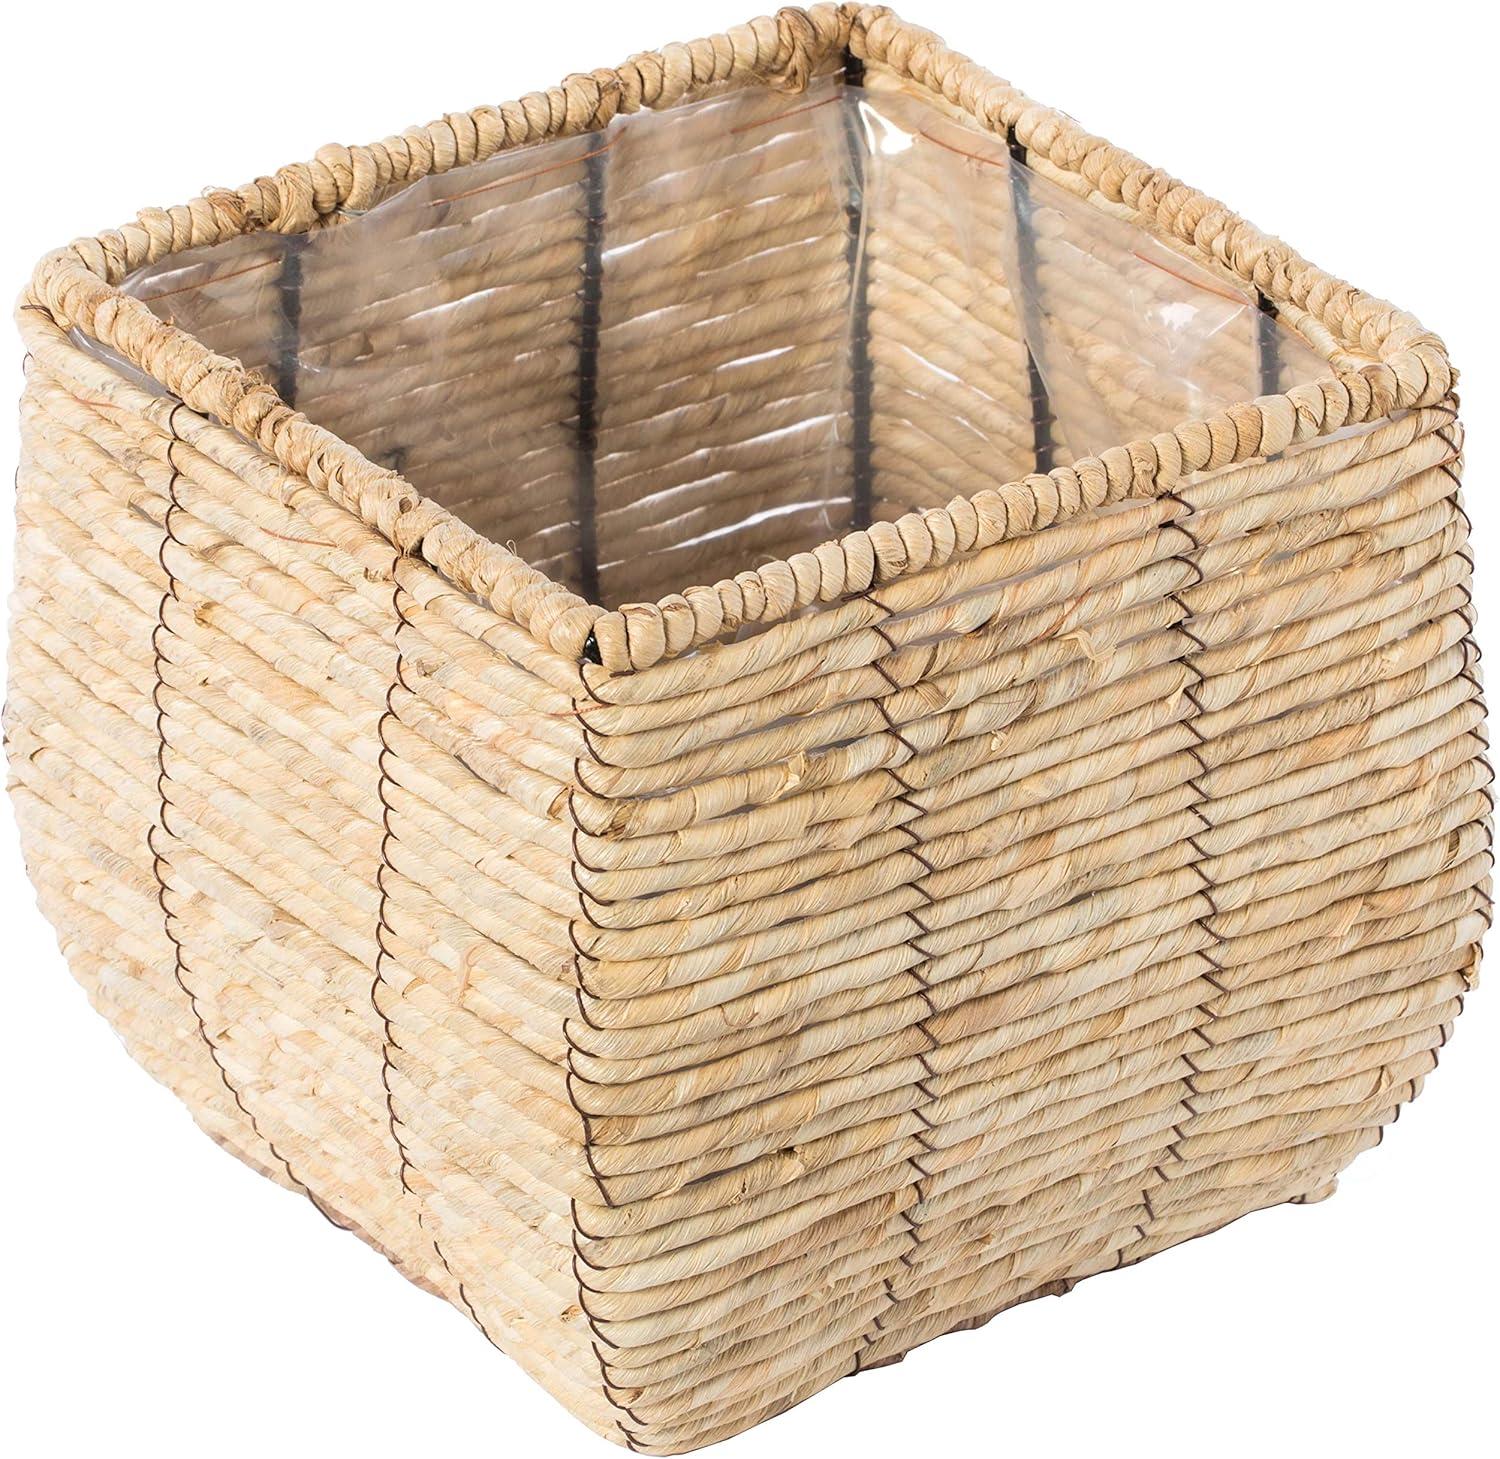 Rustic Woven Square Medium Planter with Leak-Proof Lining